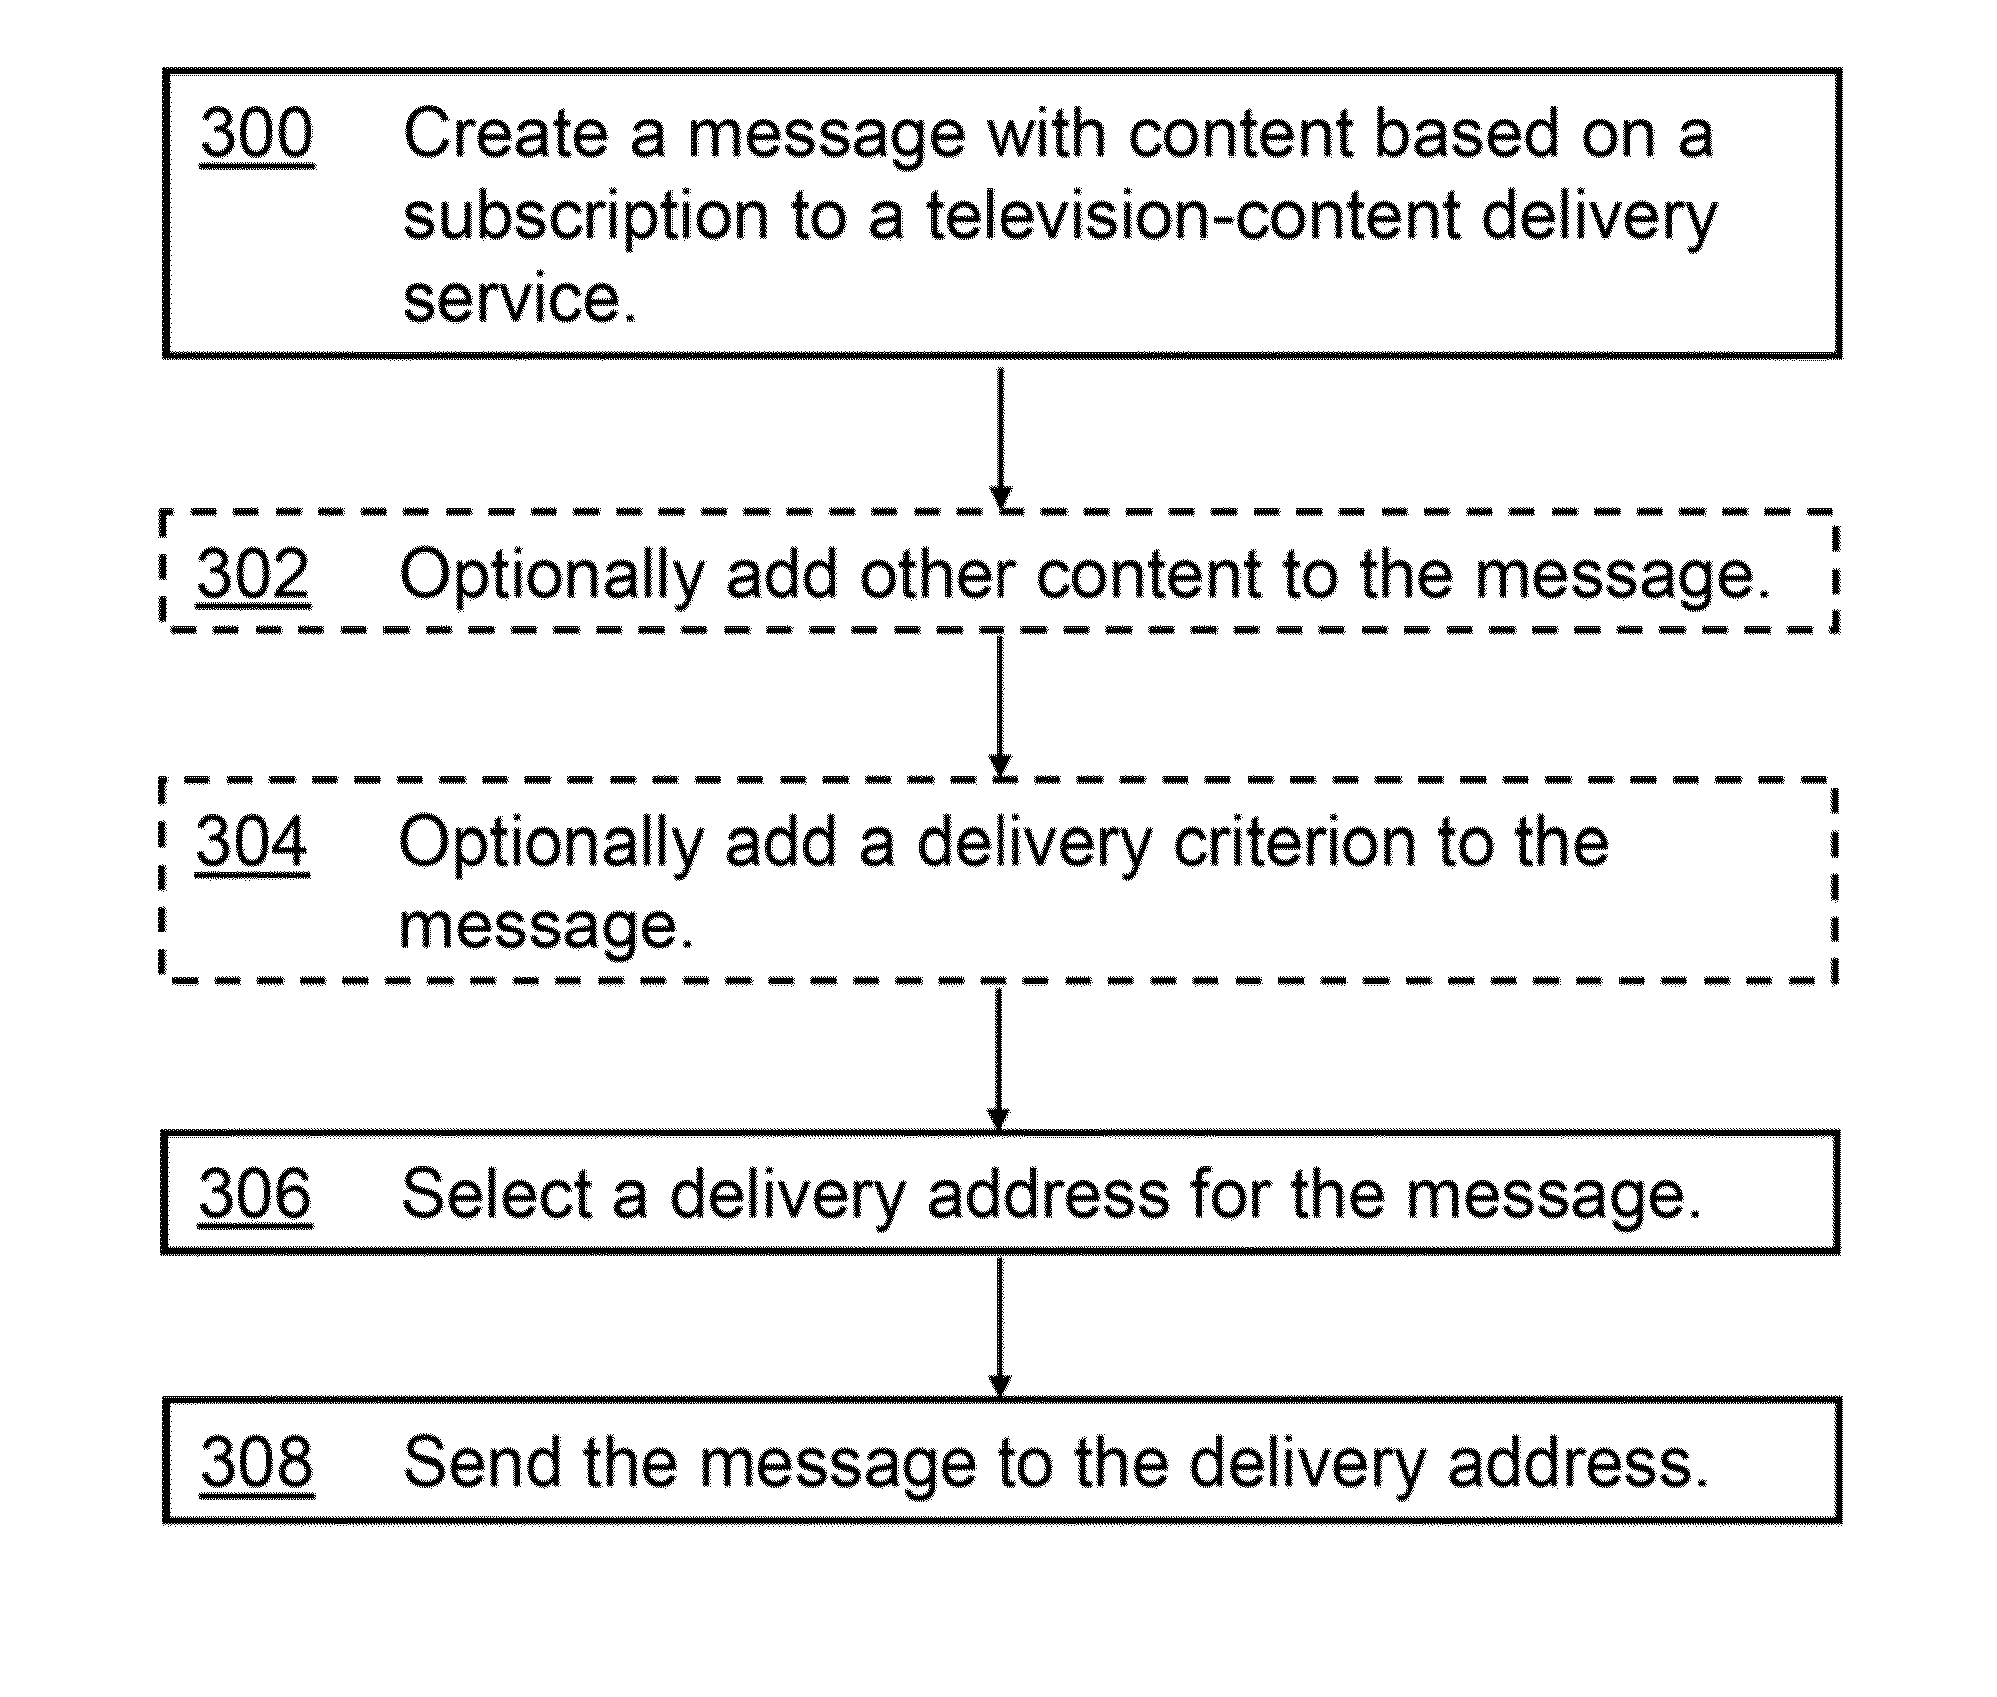 Sending a message within a television-content deliver environment